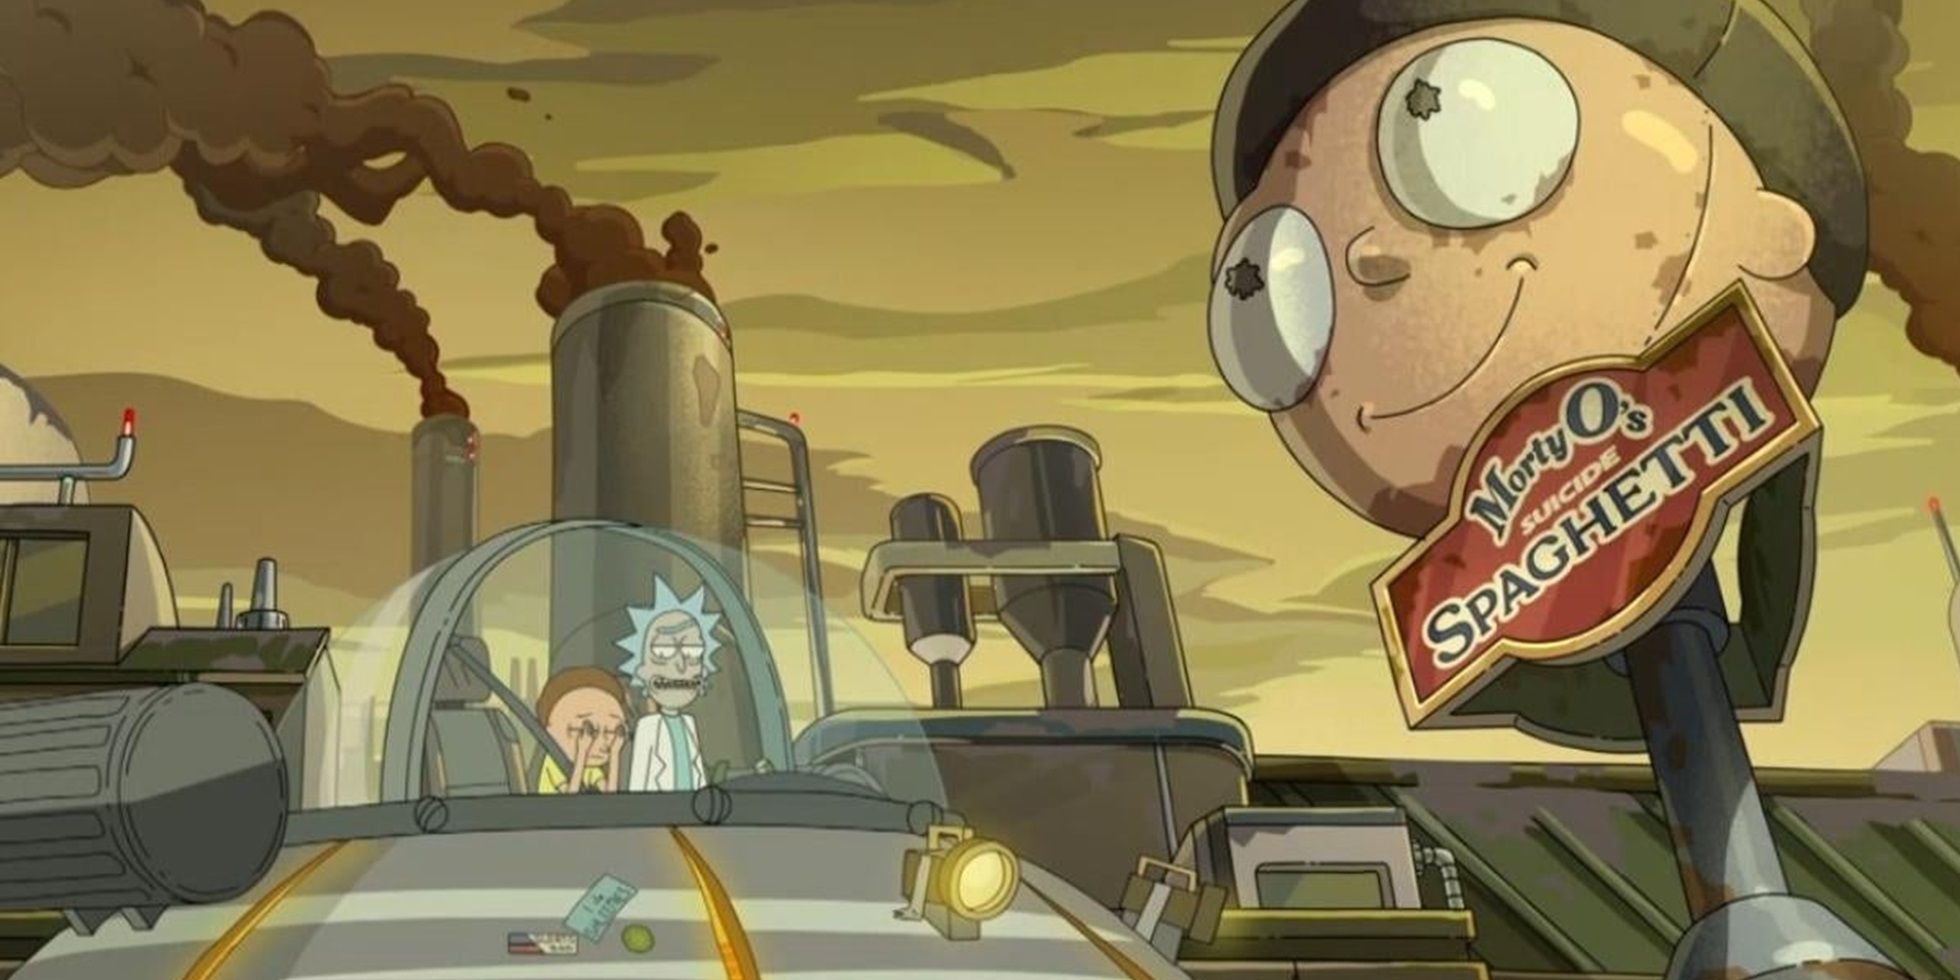 Rick takes Morty to the Morty-O's spaghetti factory in Rick and Morty